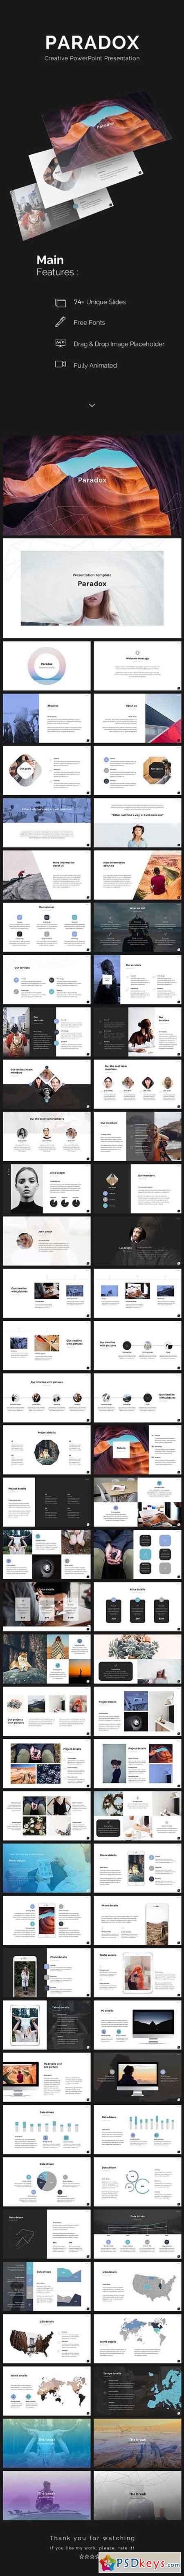 Paradox PowerPoint Template 20406480